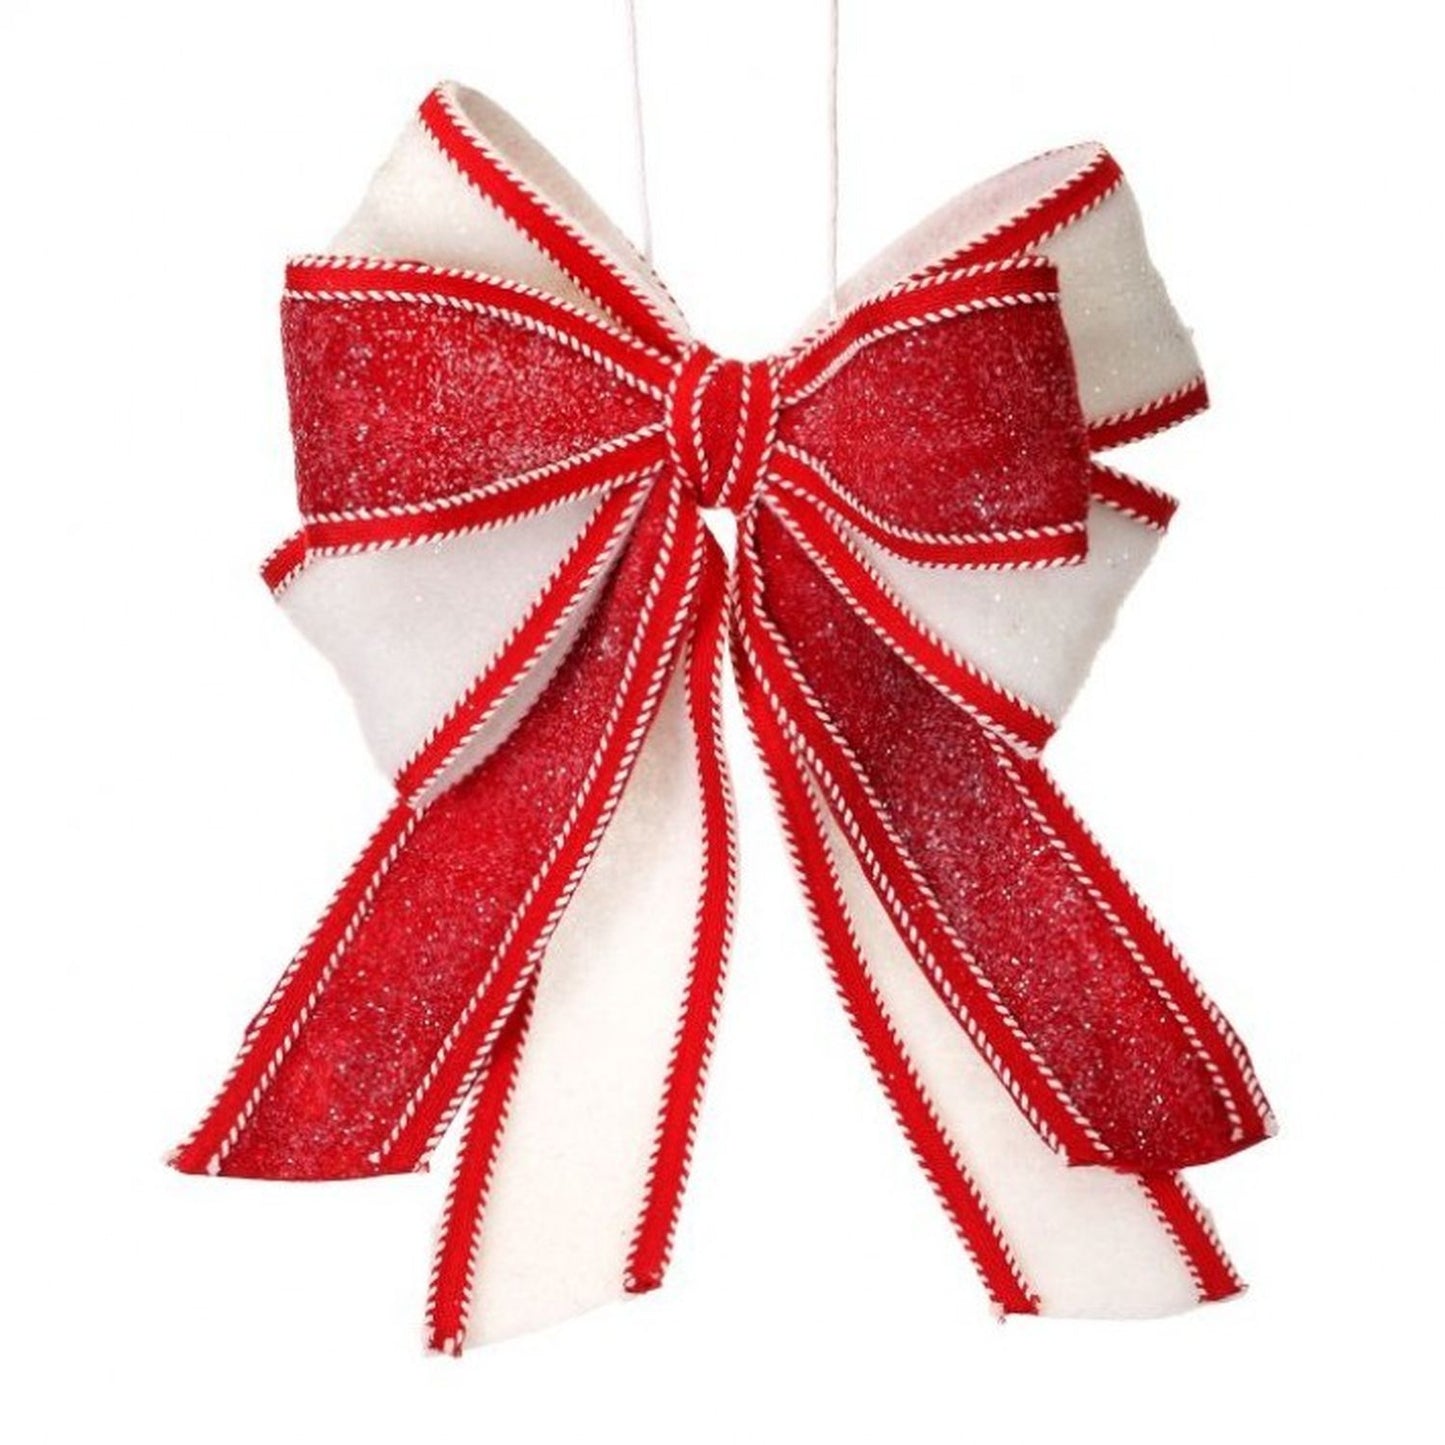 Regency International 16" Frosted Candy Stitch Bow with Wires